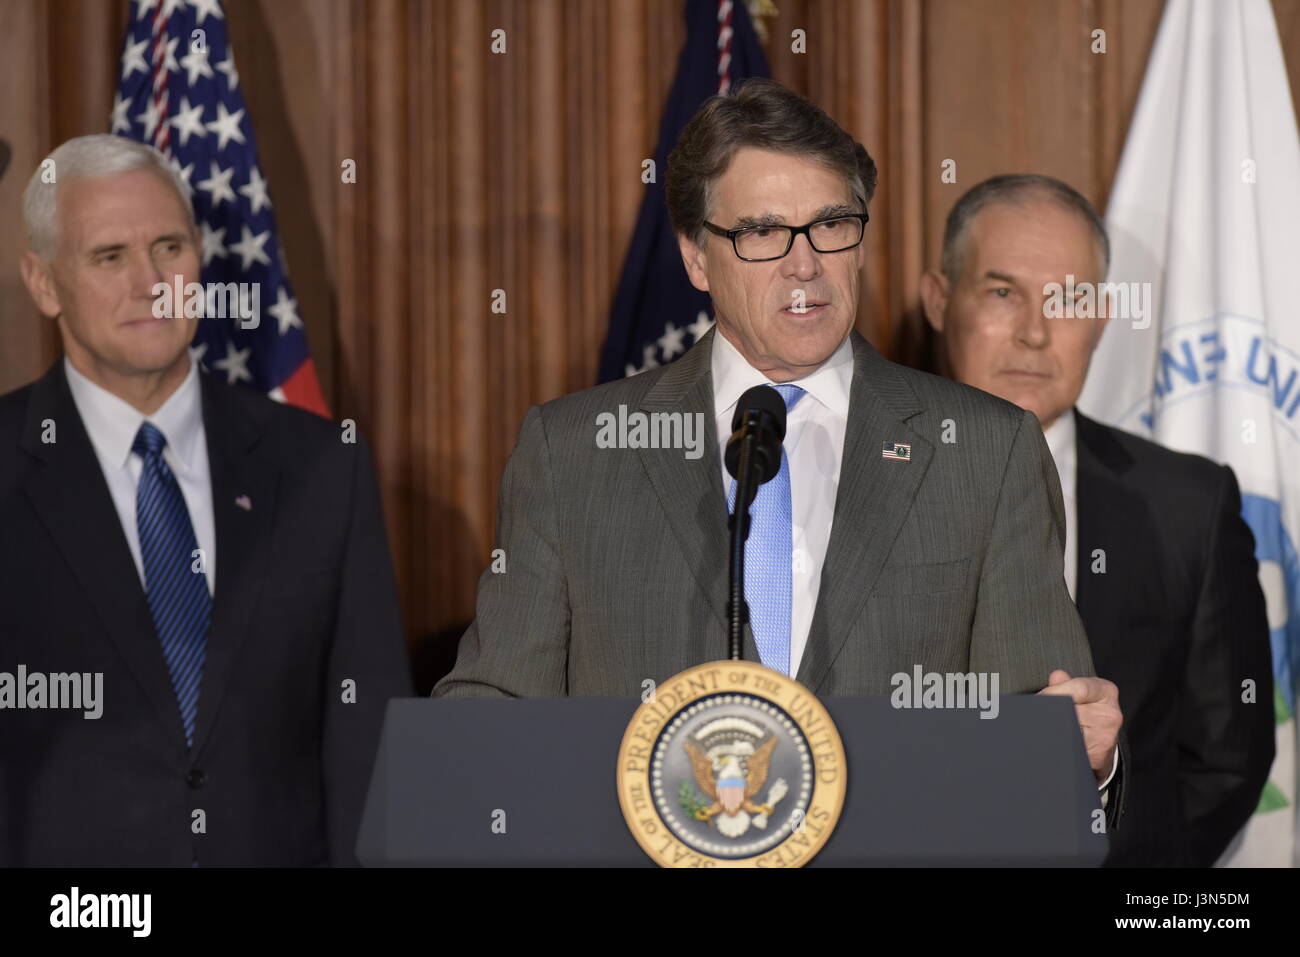 U.S. Energy Secretary Rick Perry delivers remarks at a signing ceremony for a series of anti-environmental executive orders aimed at repealing restrictions on coal at the Environmental Protection Agency headquarters March 28, 2017 in Washington, DC. The orders roll back at least 10 major Obama environmental regulations and fulfills a wish list from the fossil fuel industry. Stock Photo